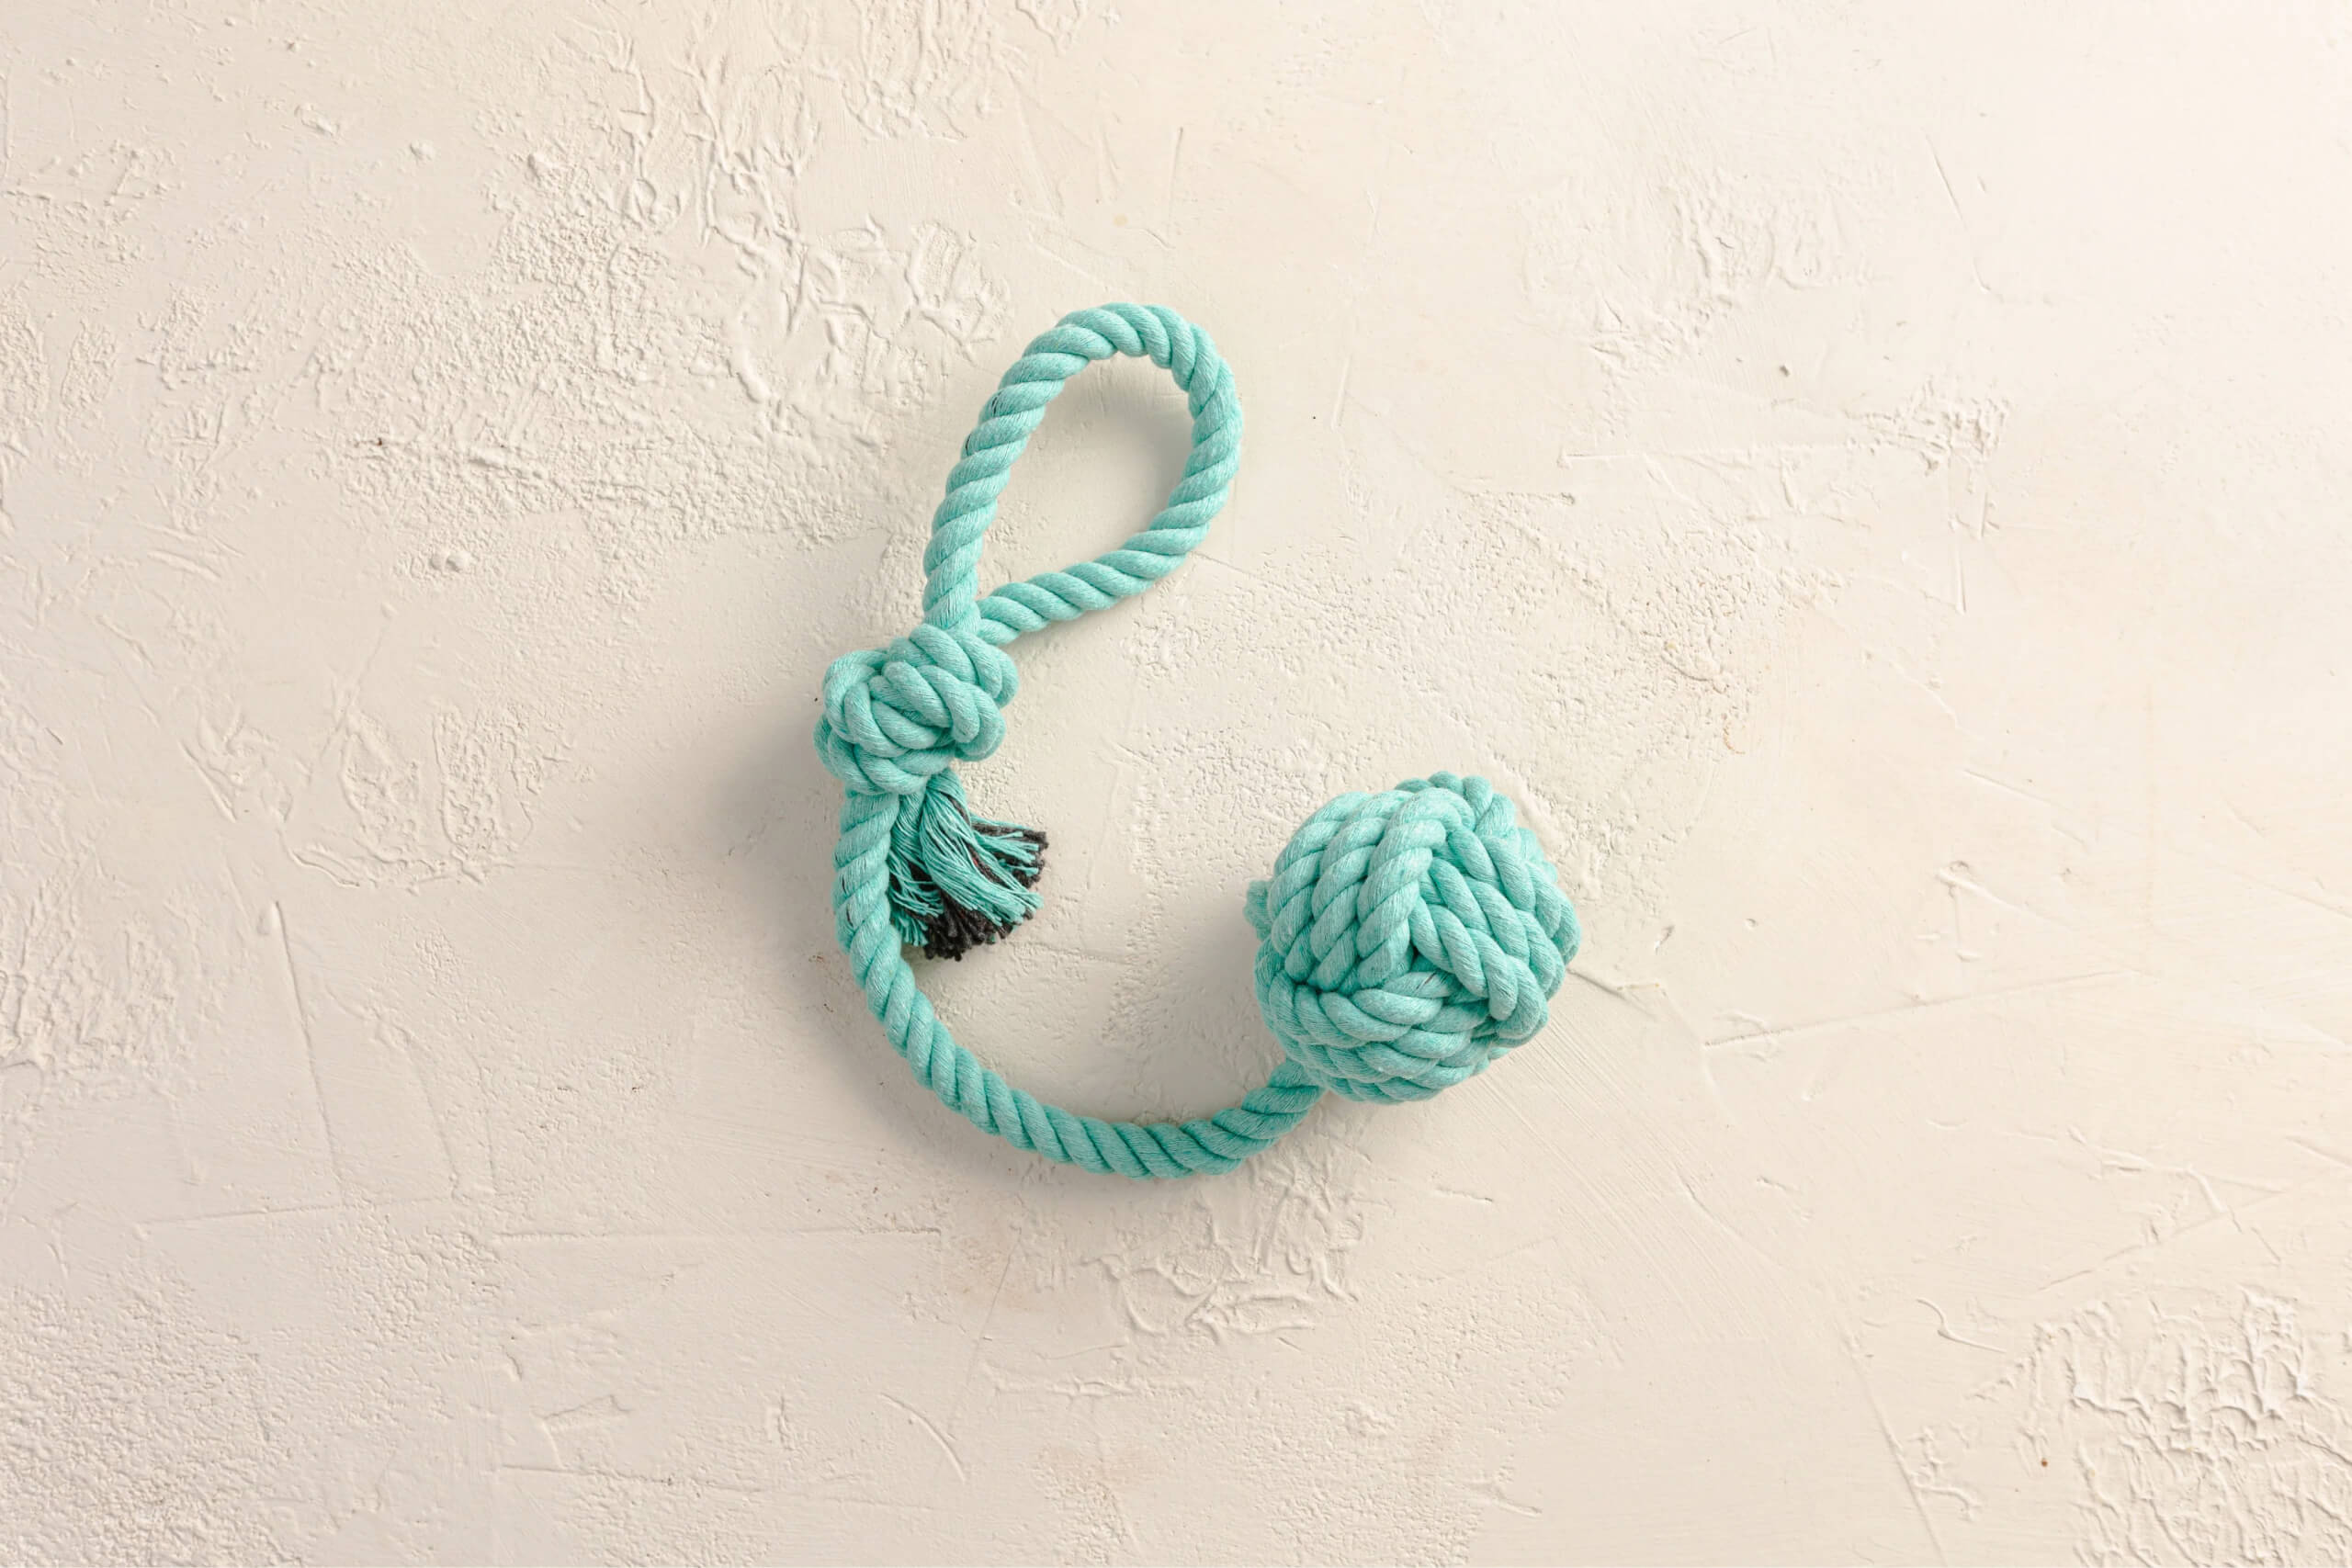 An image of a rope puppy toy